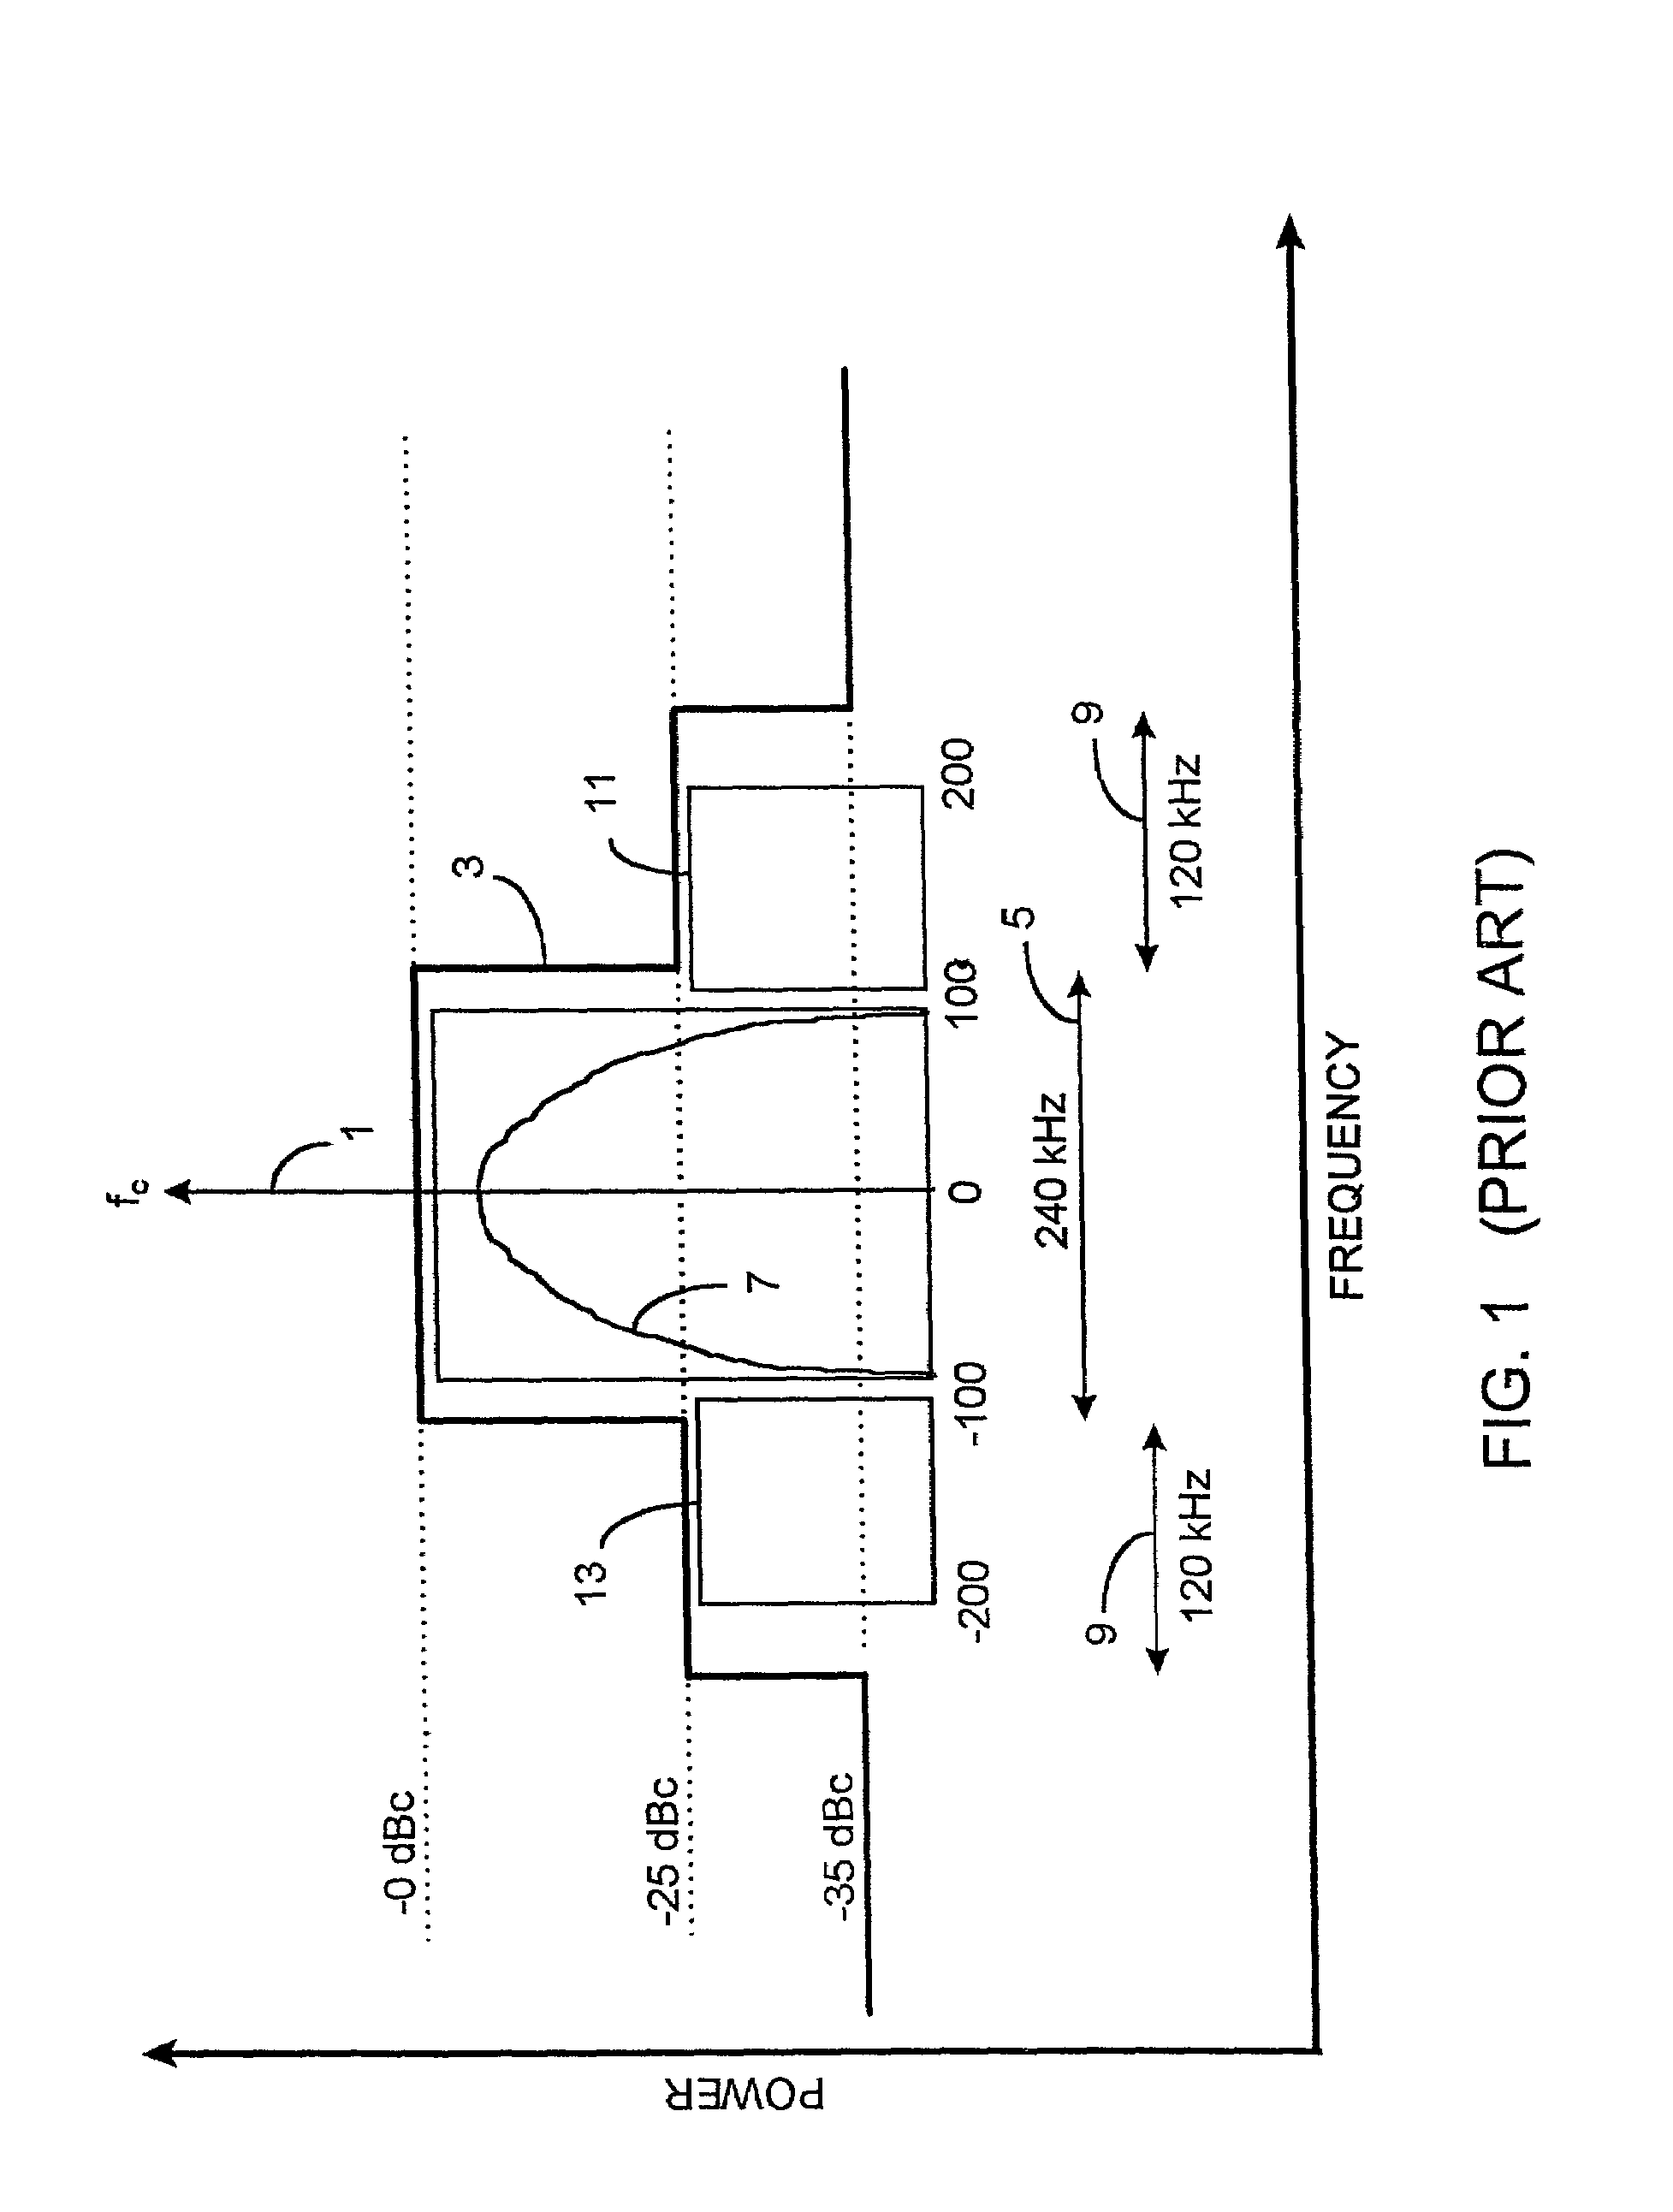 In-band on-channel digital broadcasting method and system